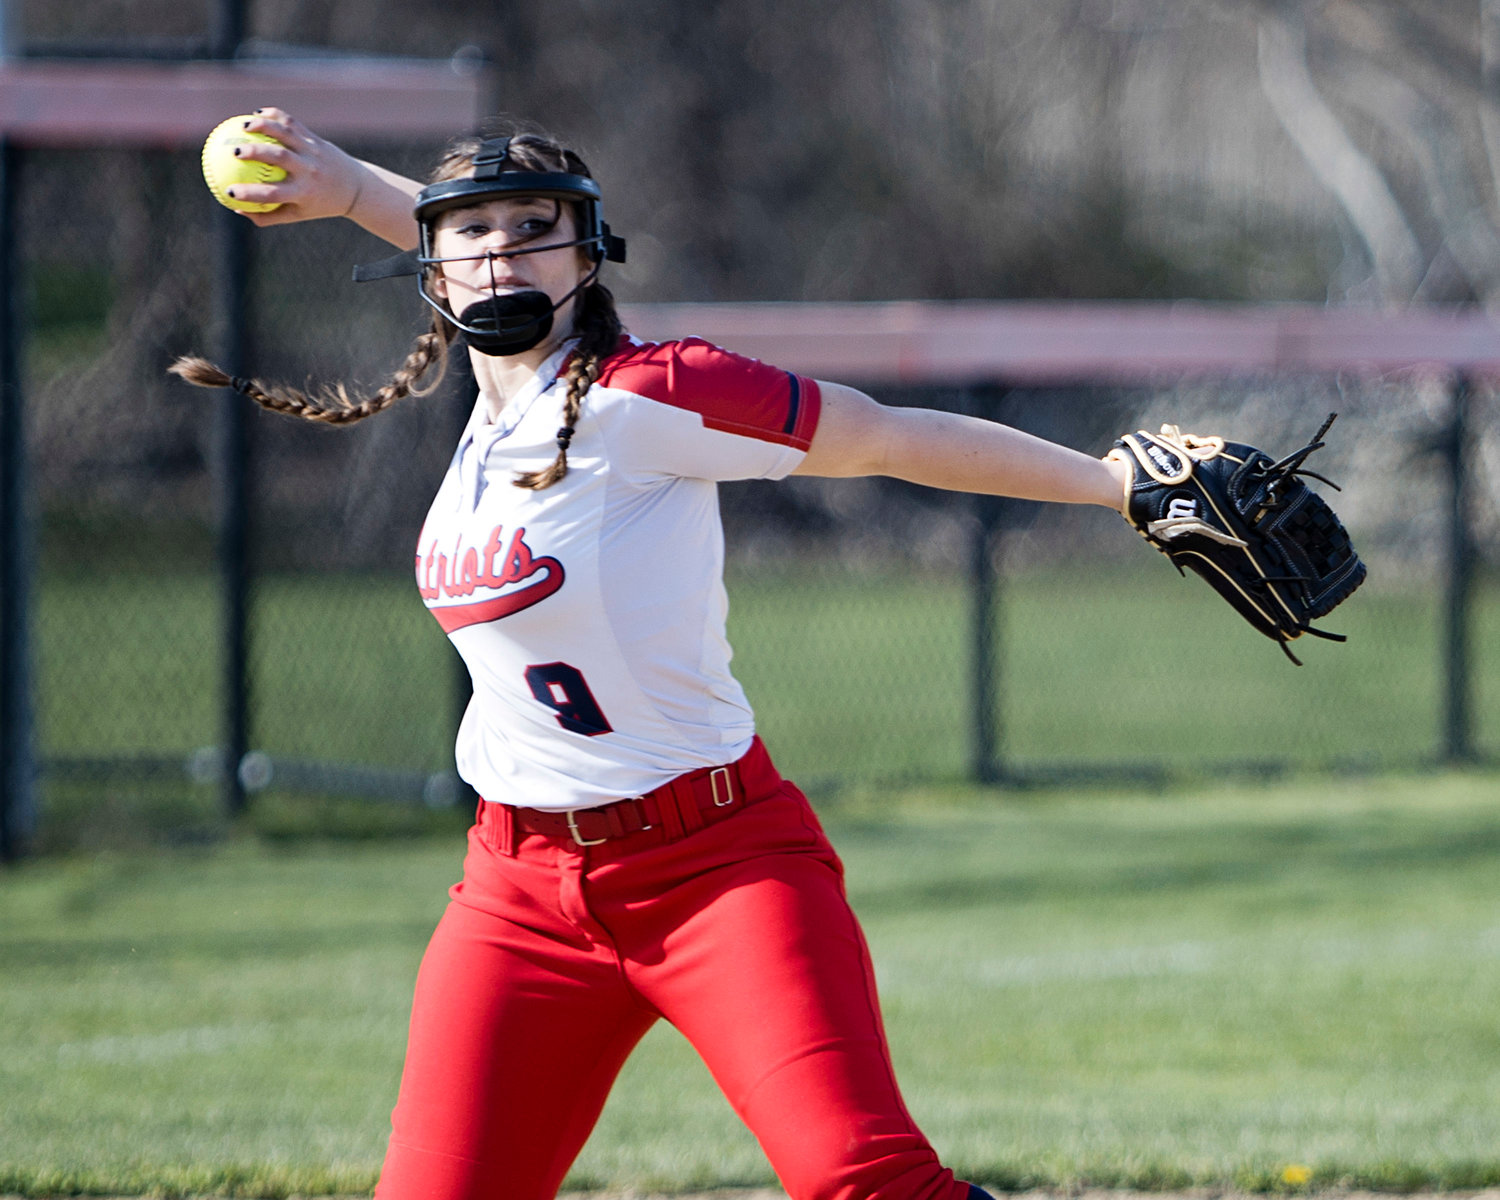 PHS third baseman Gabriella Pires throws to first for an out in the first half of the game.